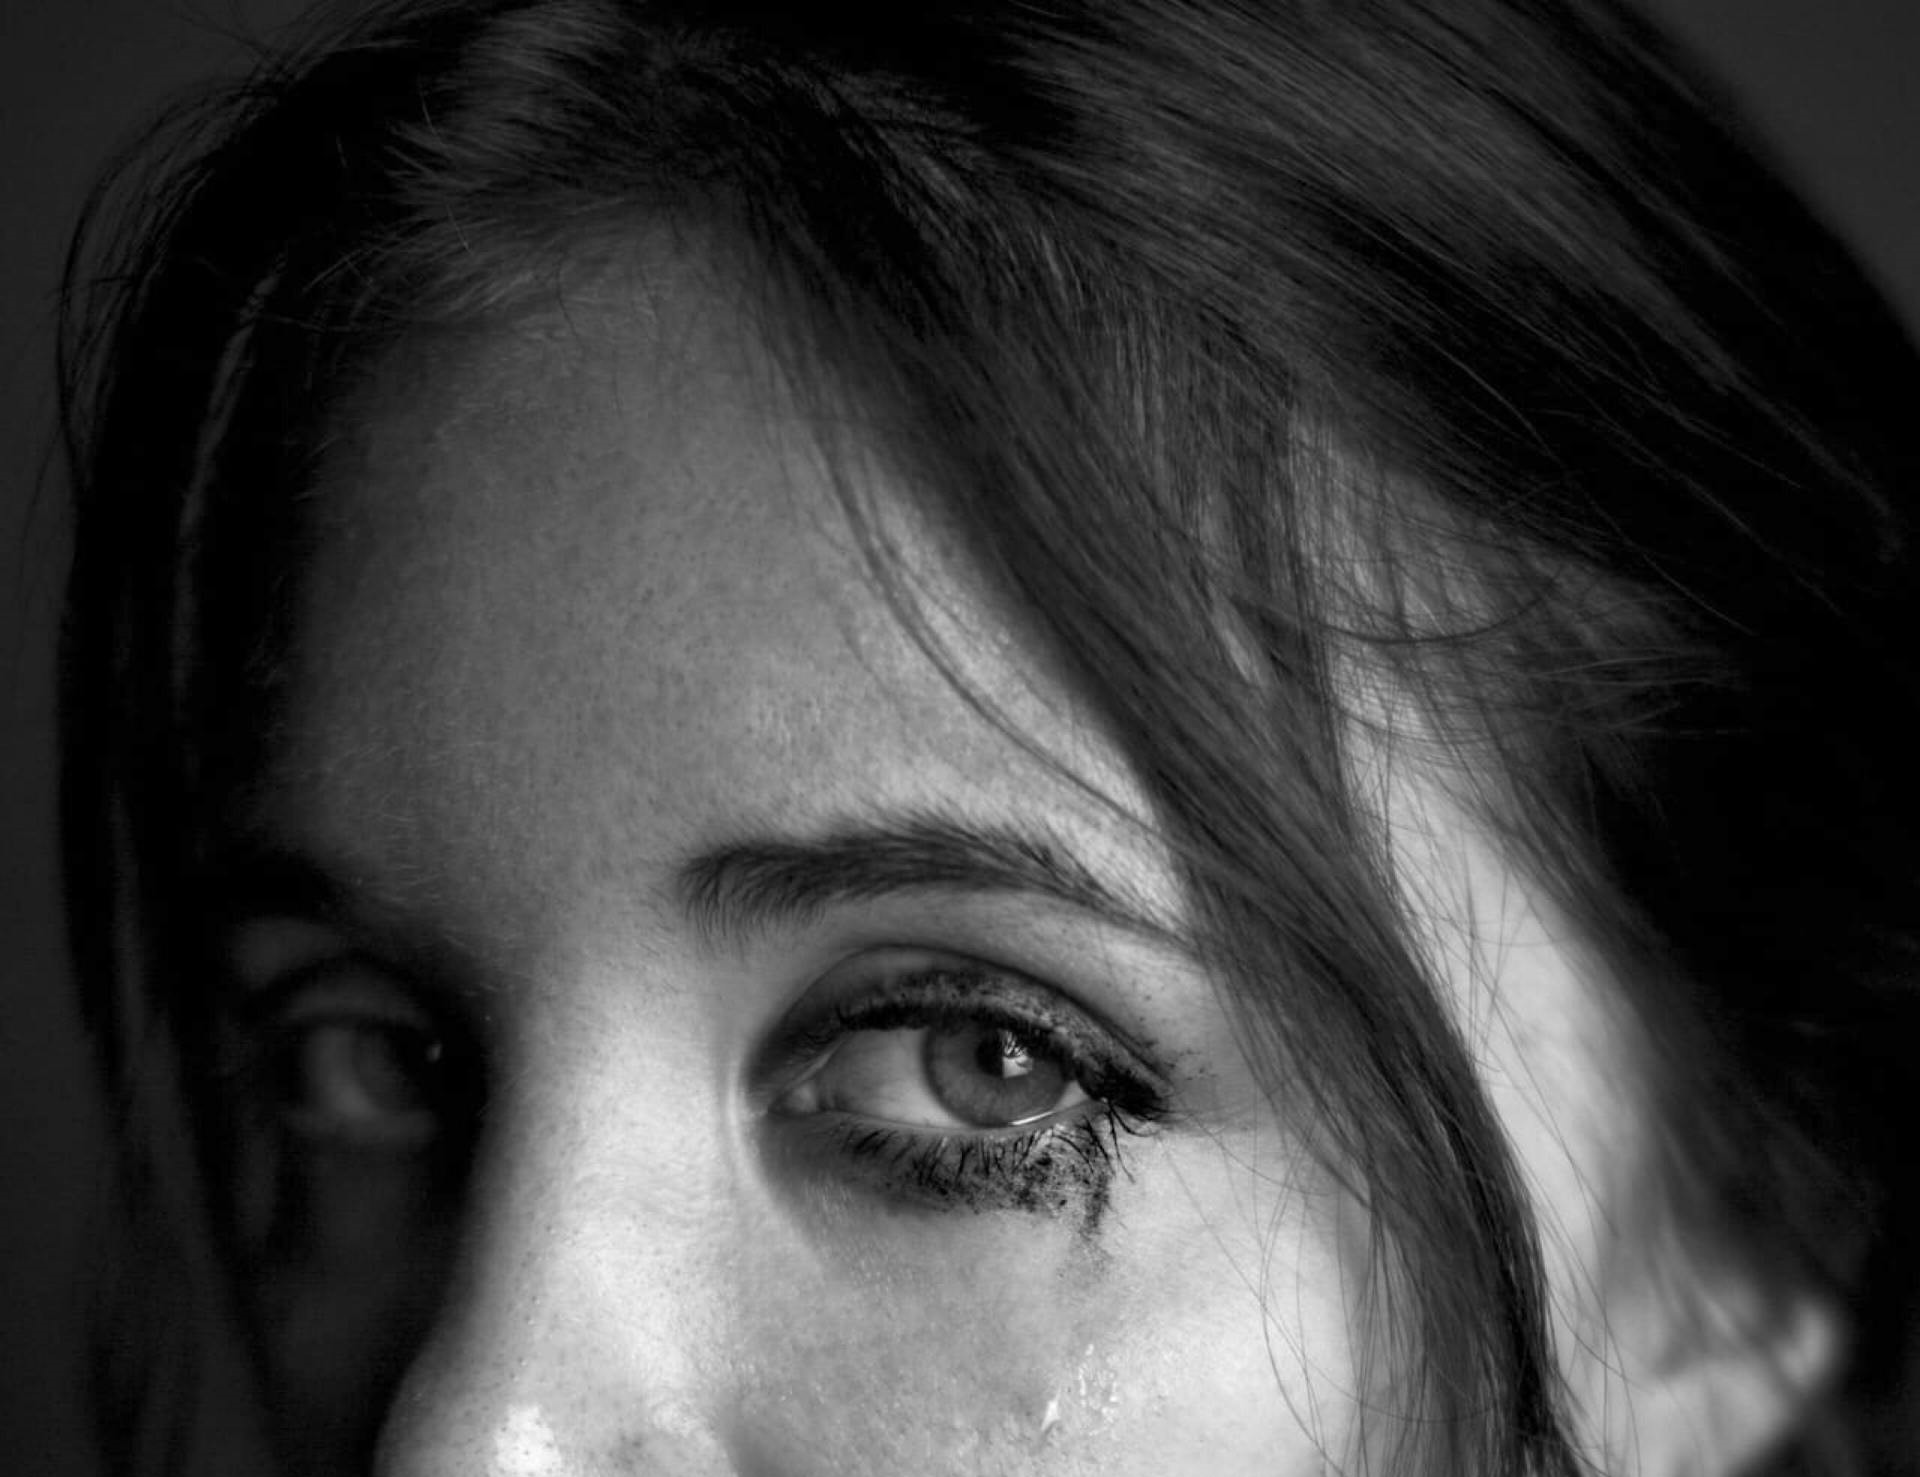 A mortified woman with tears springing from her eyes | Source: Pexels